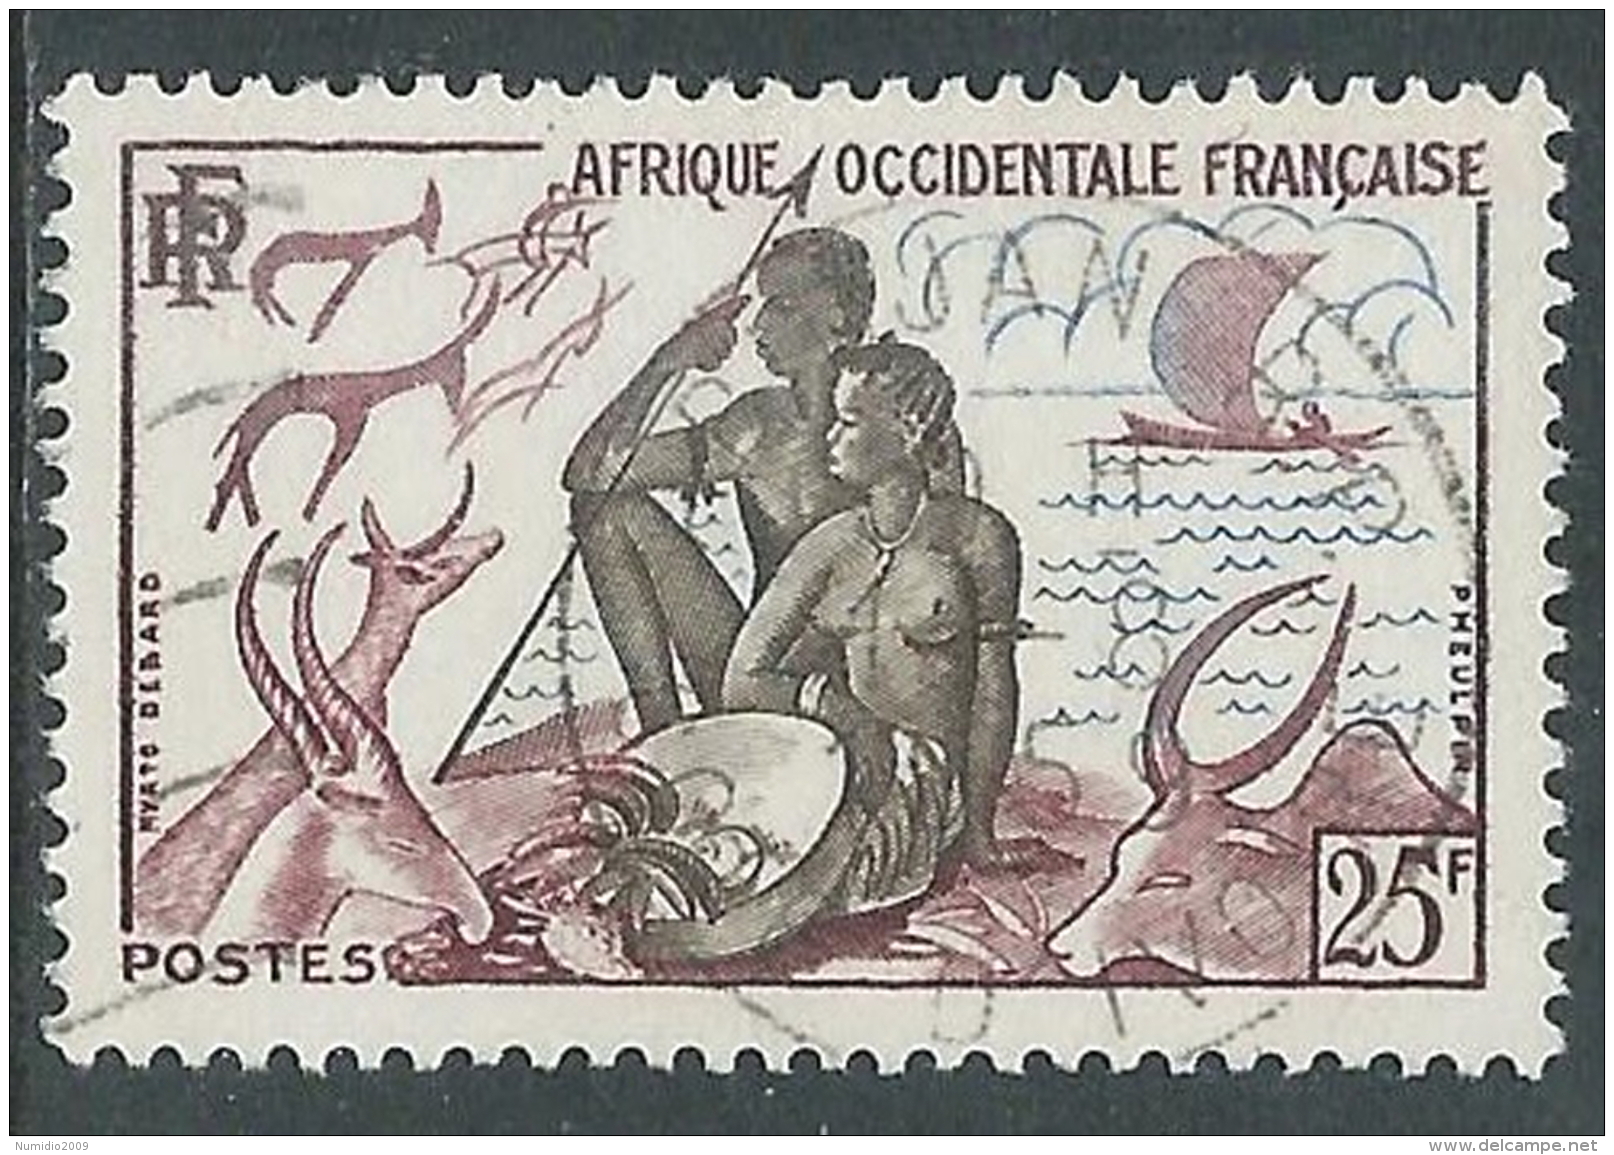 1954 AFRICA OCCIDENTALE FRANCESE USATO ALIMENTAZIONE 25 F - R39-7 - Used Stamps